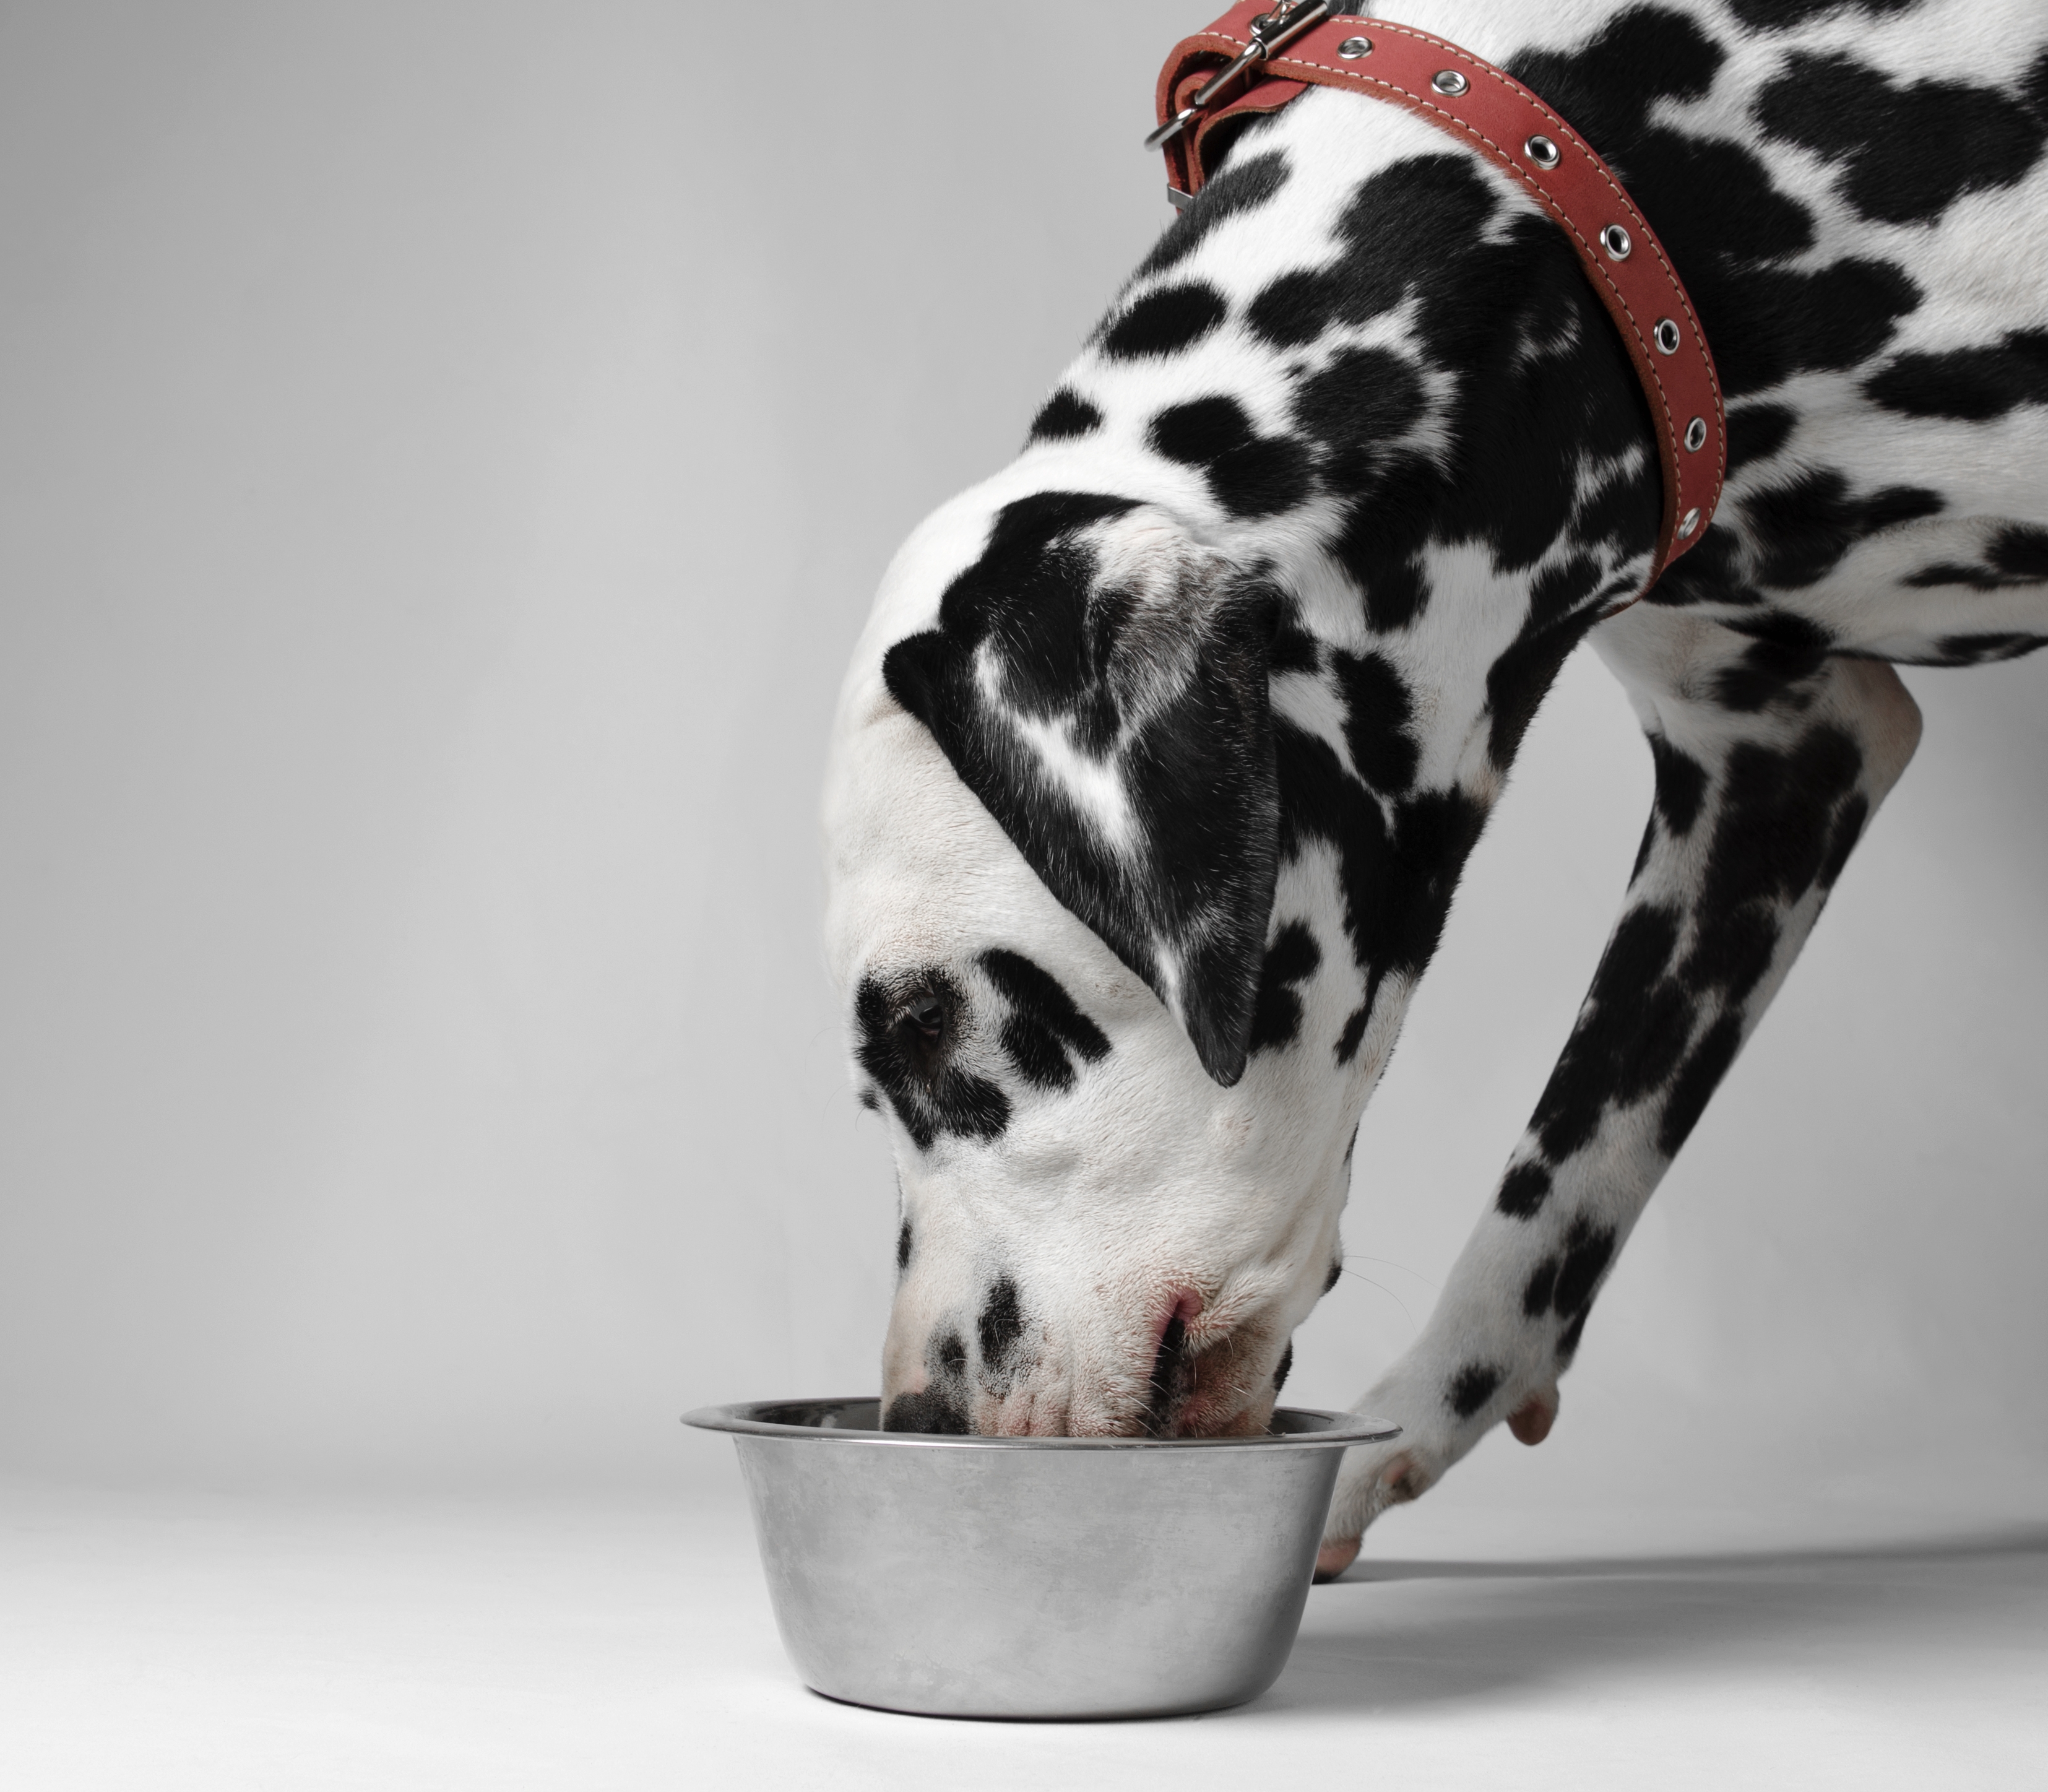 Dalmatian dog eating dry food from a bowl